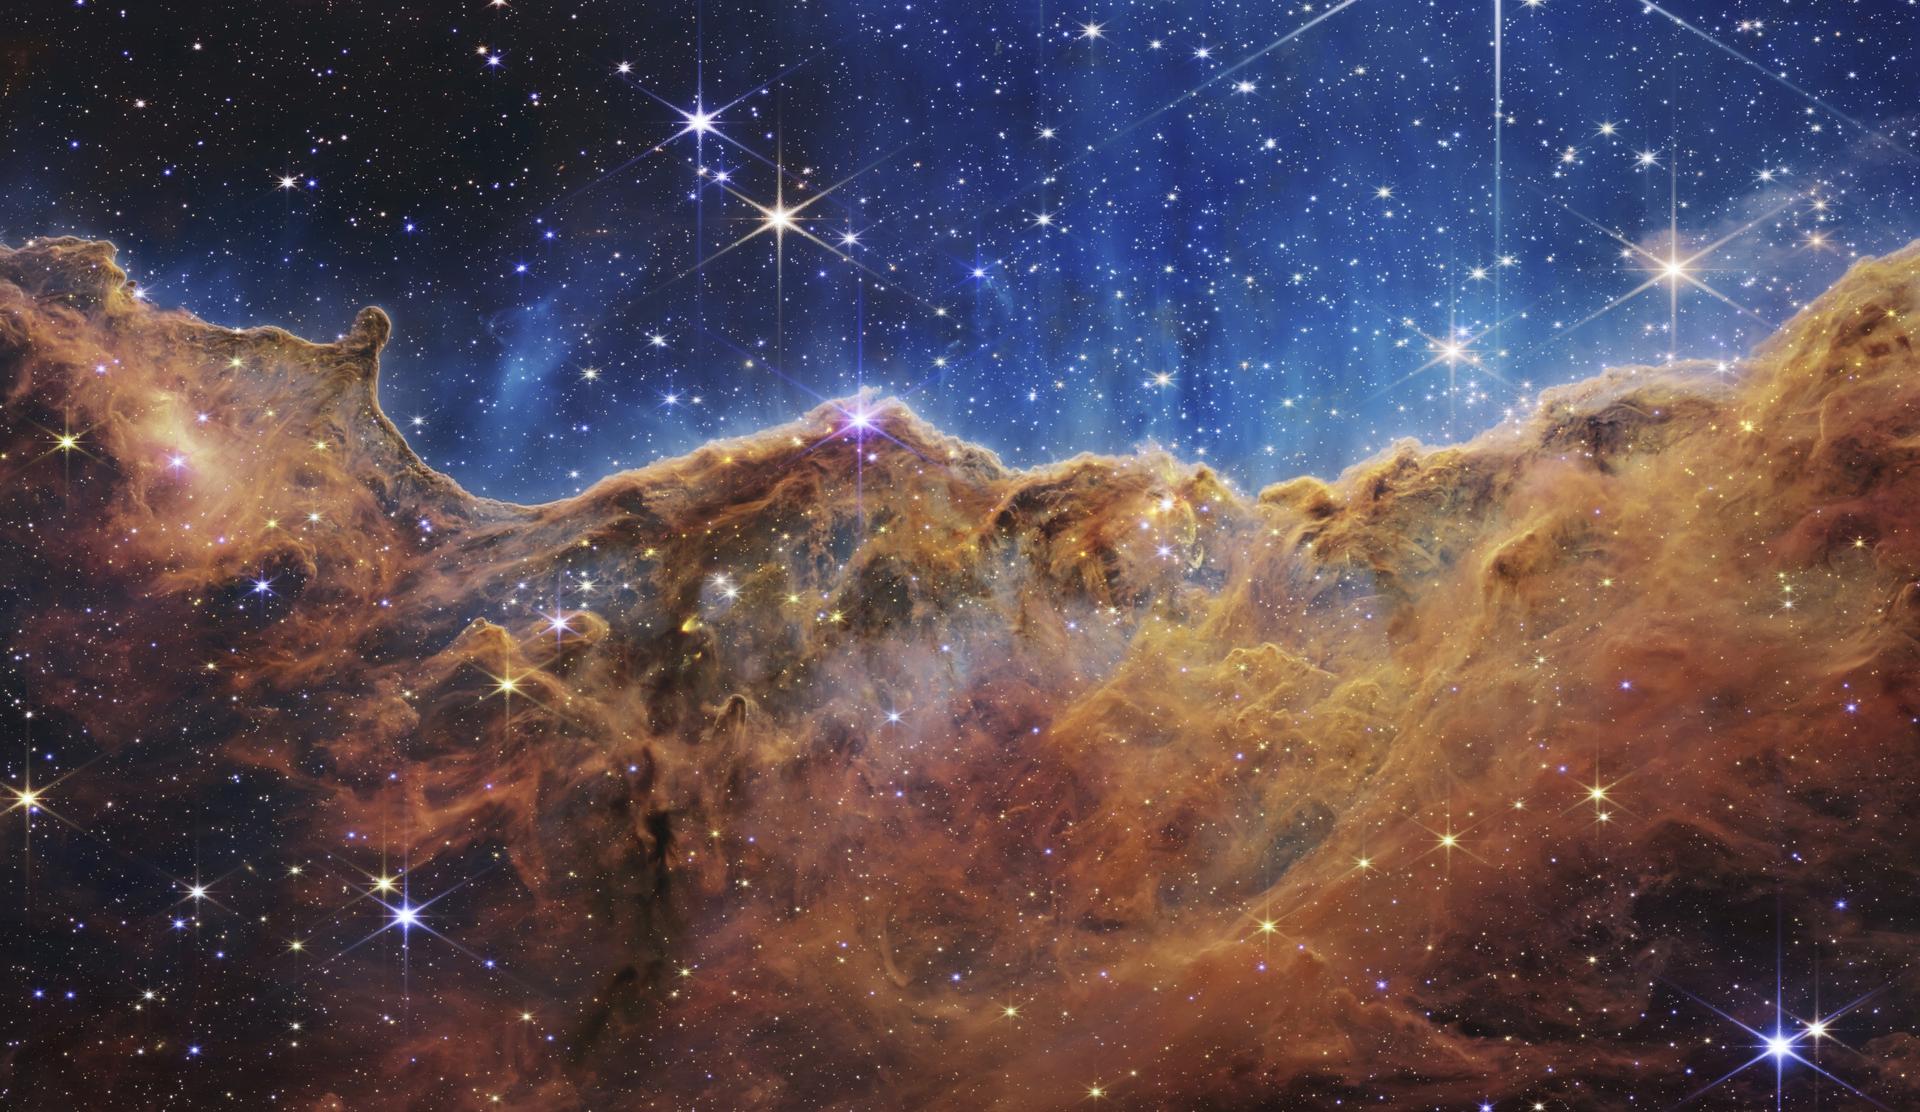 This image shows the edge of a nearby, young, star-forming region NGC 3324 in the Carina Nebula